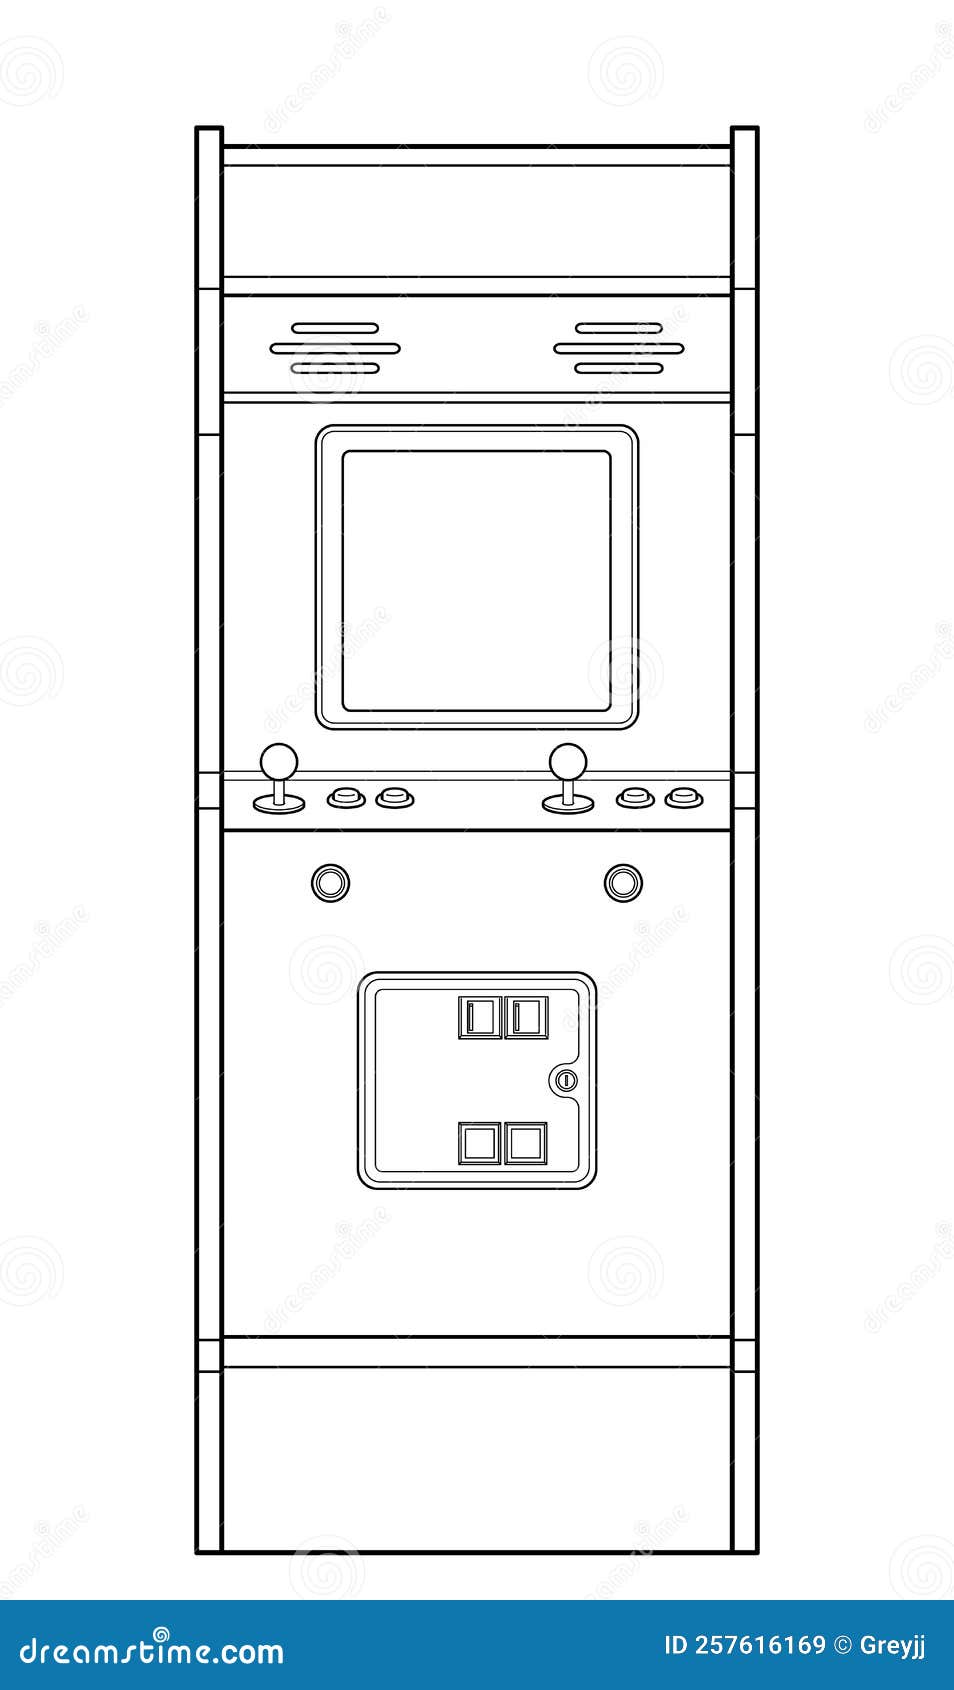 Arcade Cabinet Or Arcade Machine In Flat Style, Front View Vector ...